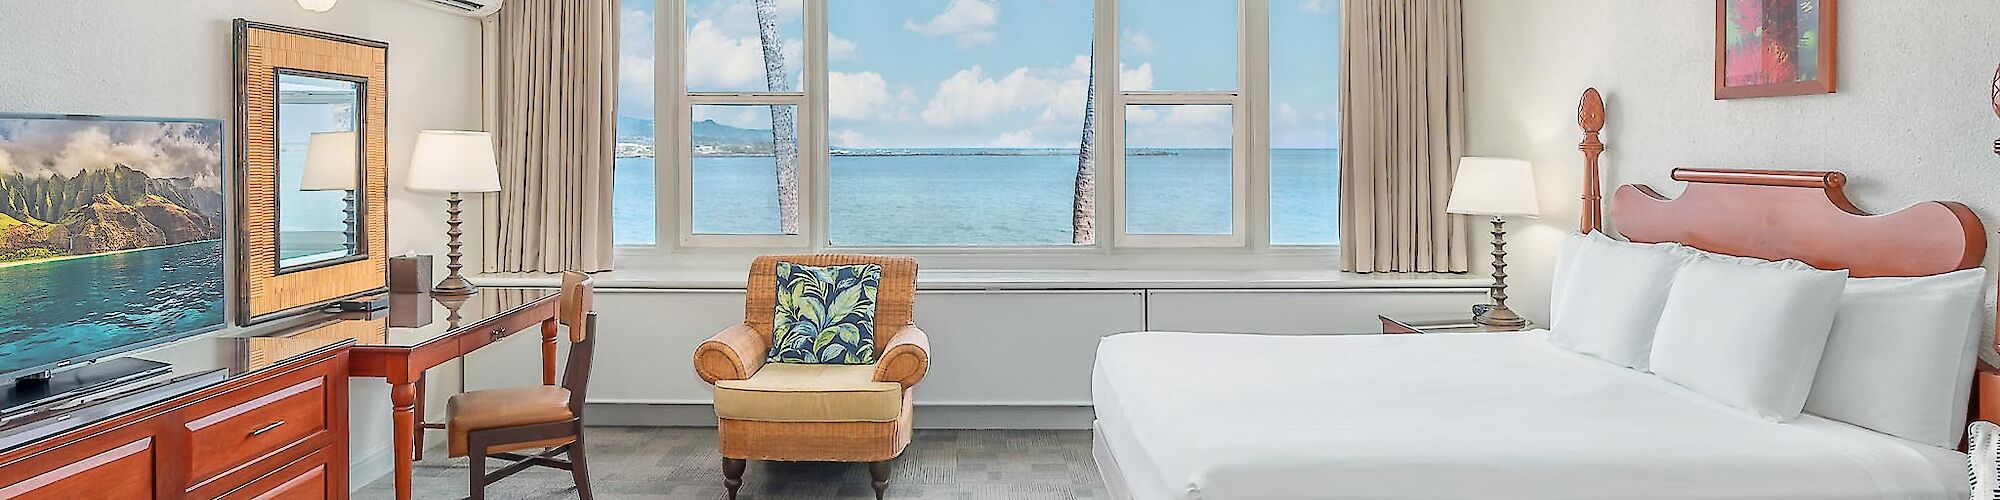 A spacious hotel room with a large bed, armchair, desk, TV, ceiling fan, and ocean view through the window, decorated with paintings.